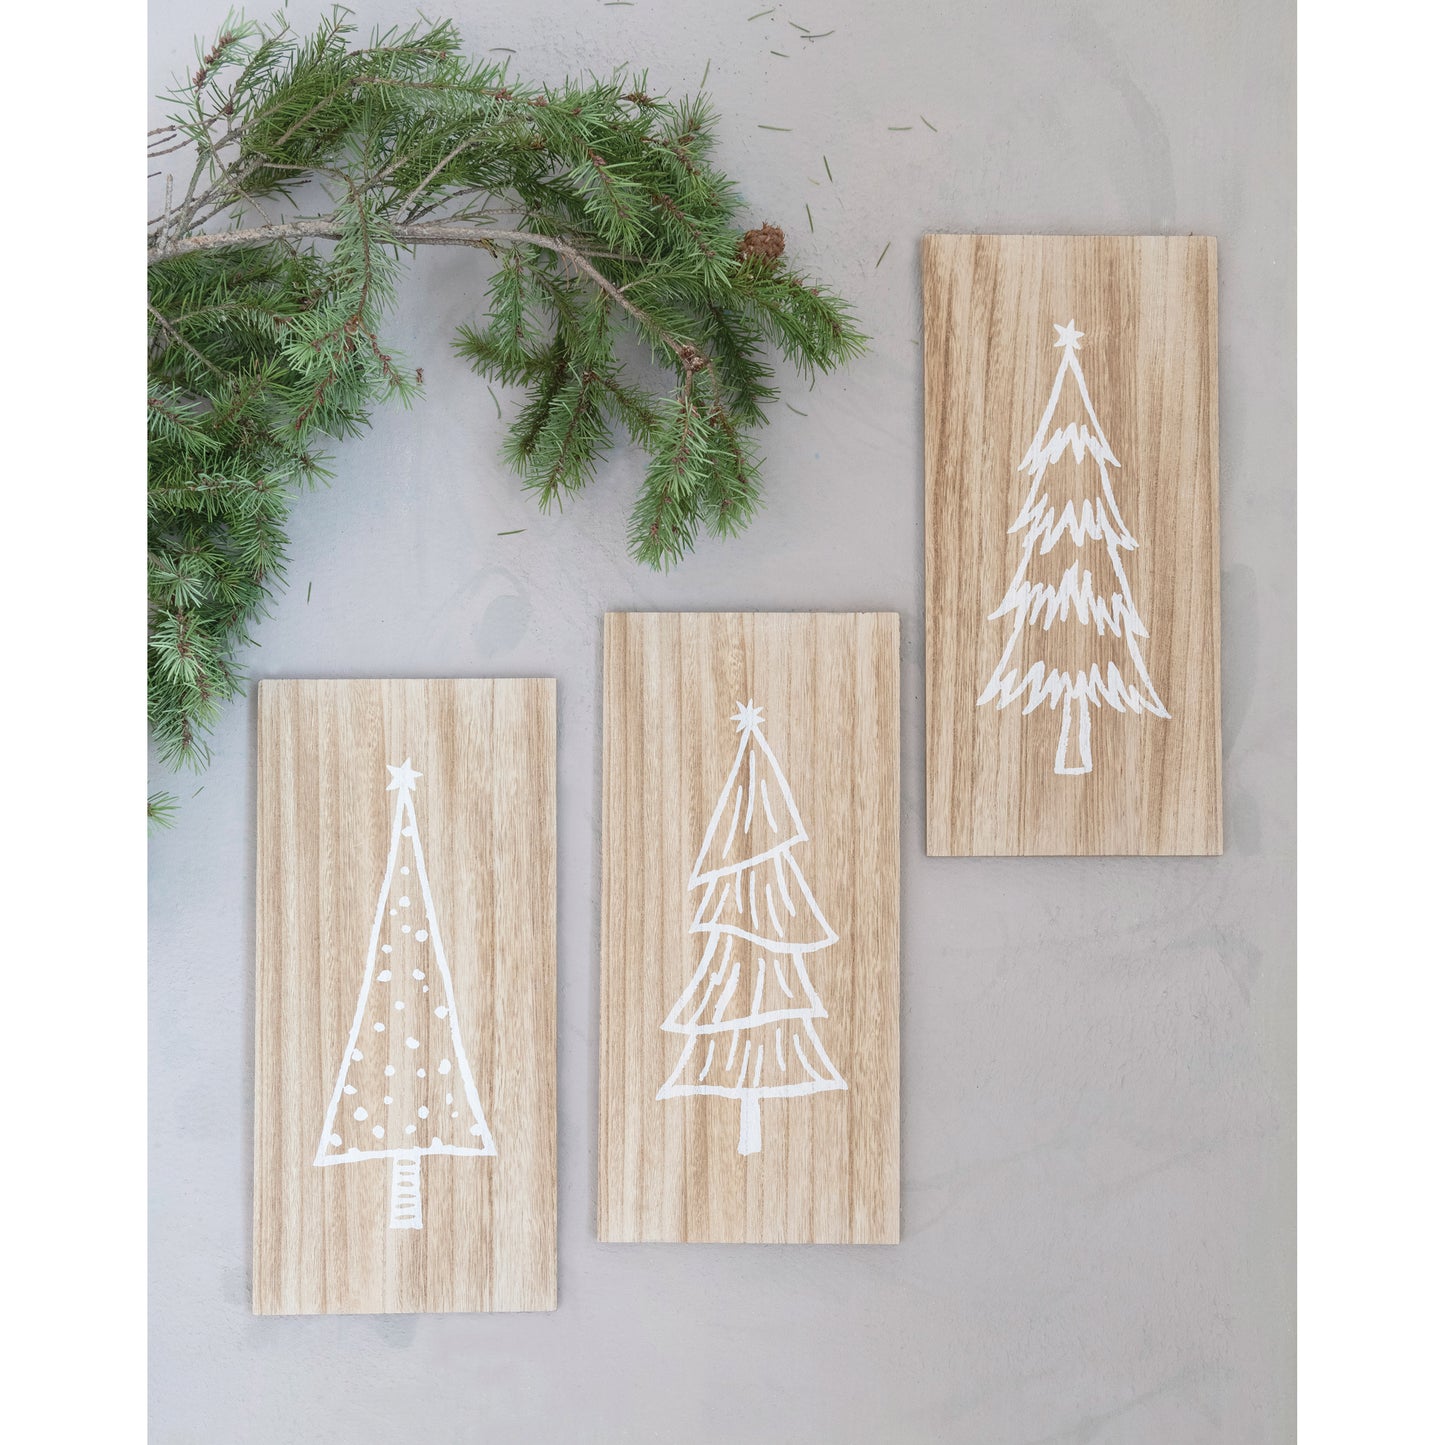 MDF Wall Decor with Christmas Trees, 3 Styles (Hangs or Sits)